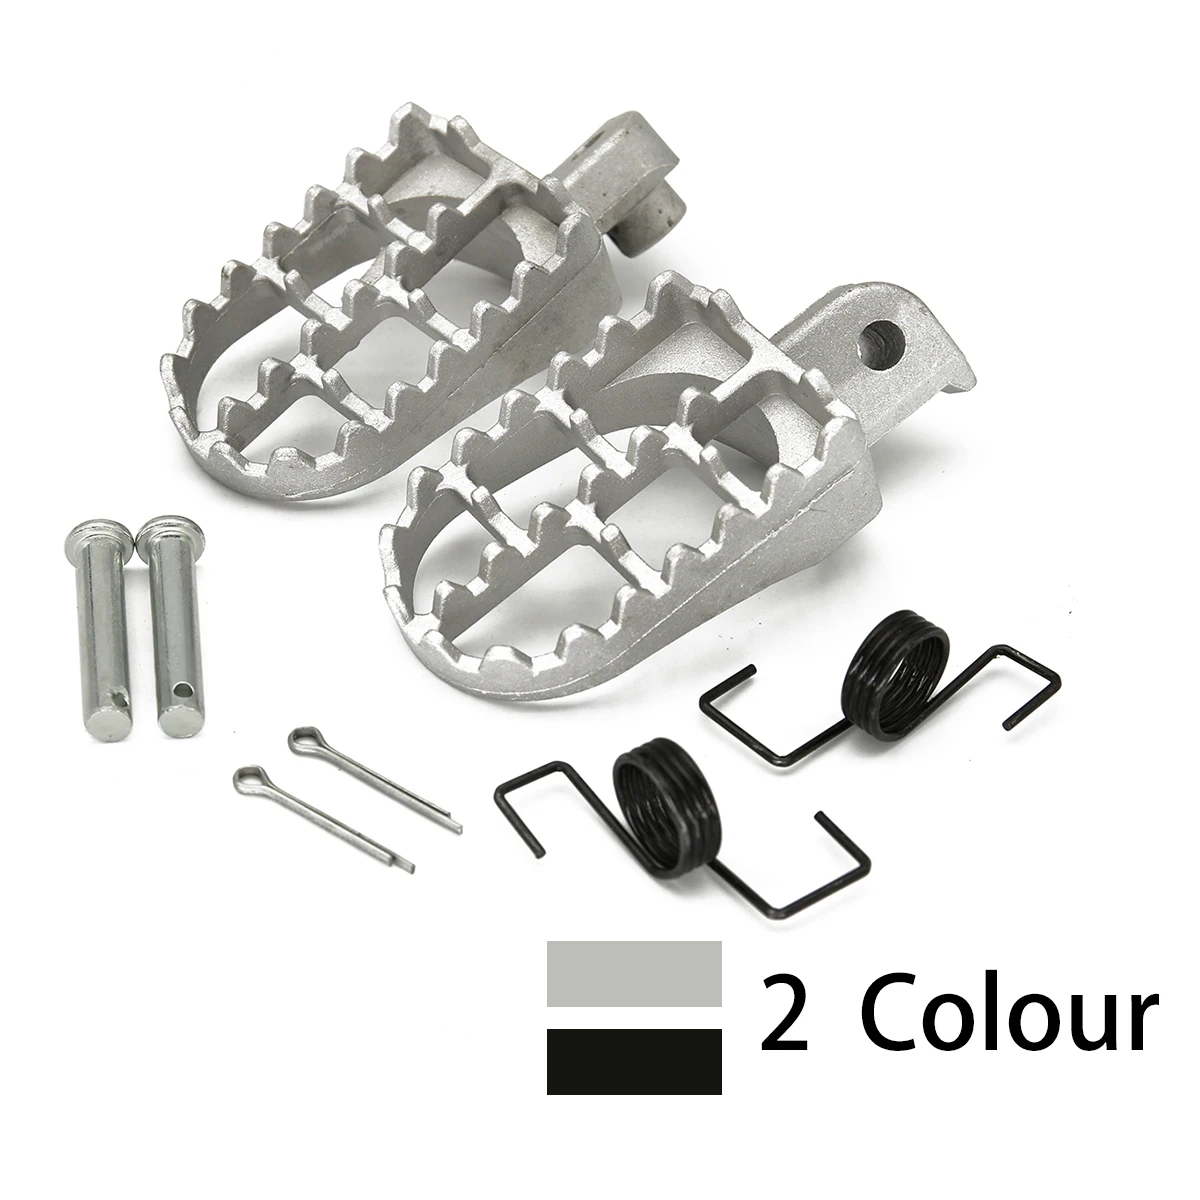 CNC Billet WIDE FAT Foot Pegs Pedal Pads For Yamaha TW200 PW50 PW80 Bikes - $28.02+